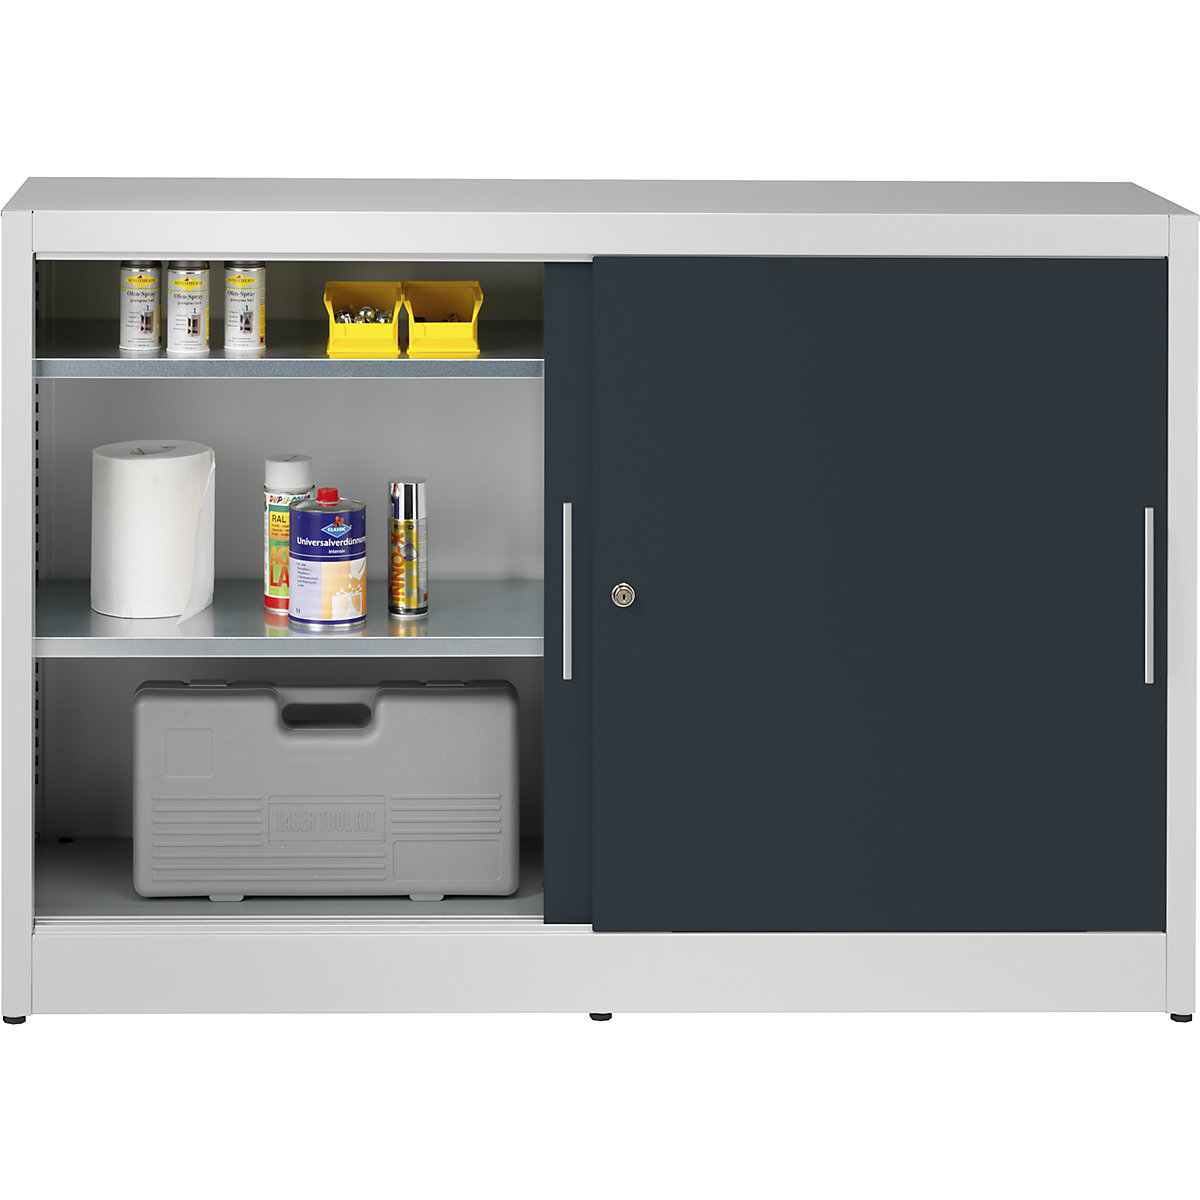 Sliding door cupboard, height 1000 mm – eurokraft pro, with centre partition and 2 x 2 shelves, width 1500 mm, depth 420 mm, doors charcoal RAL 7016-5